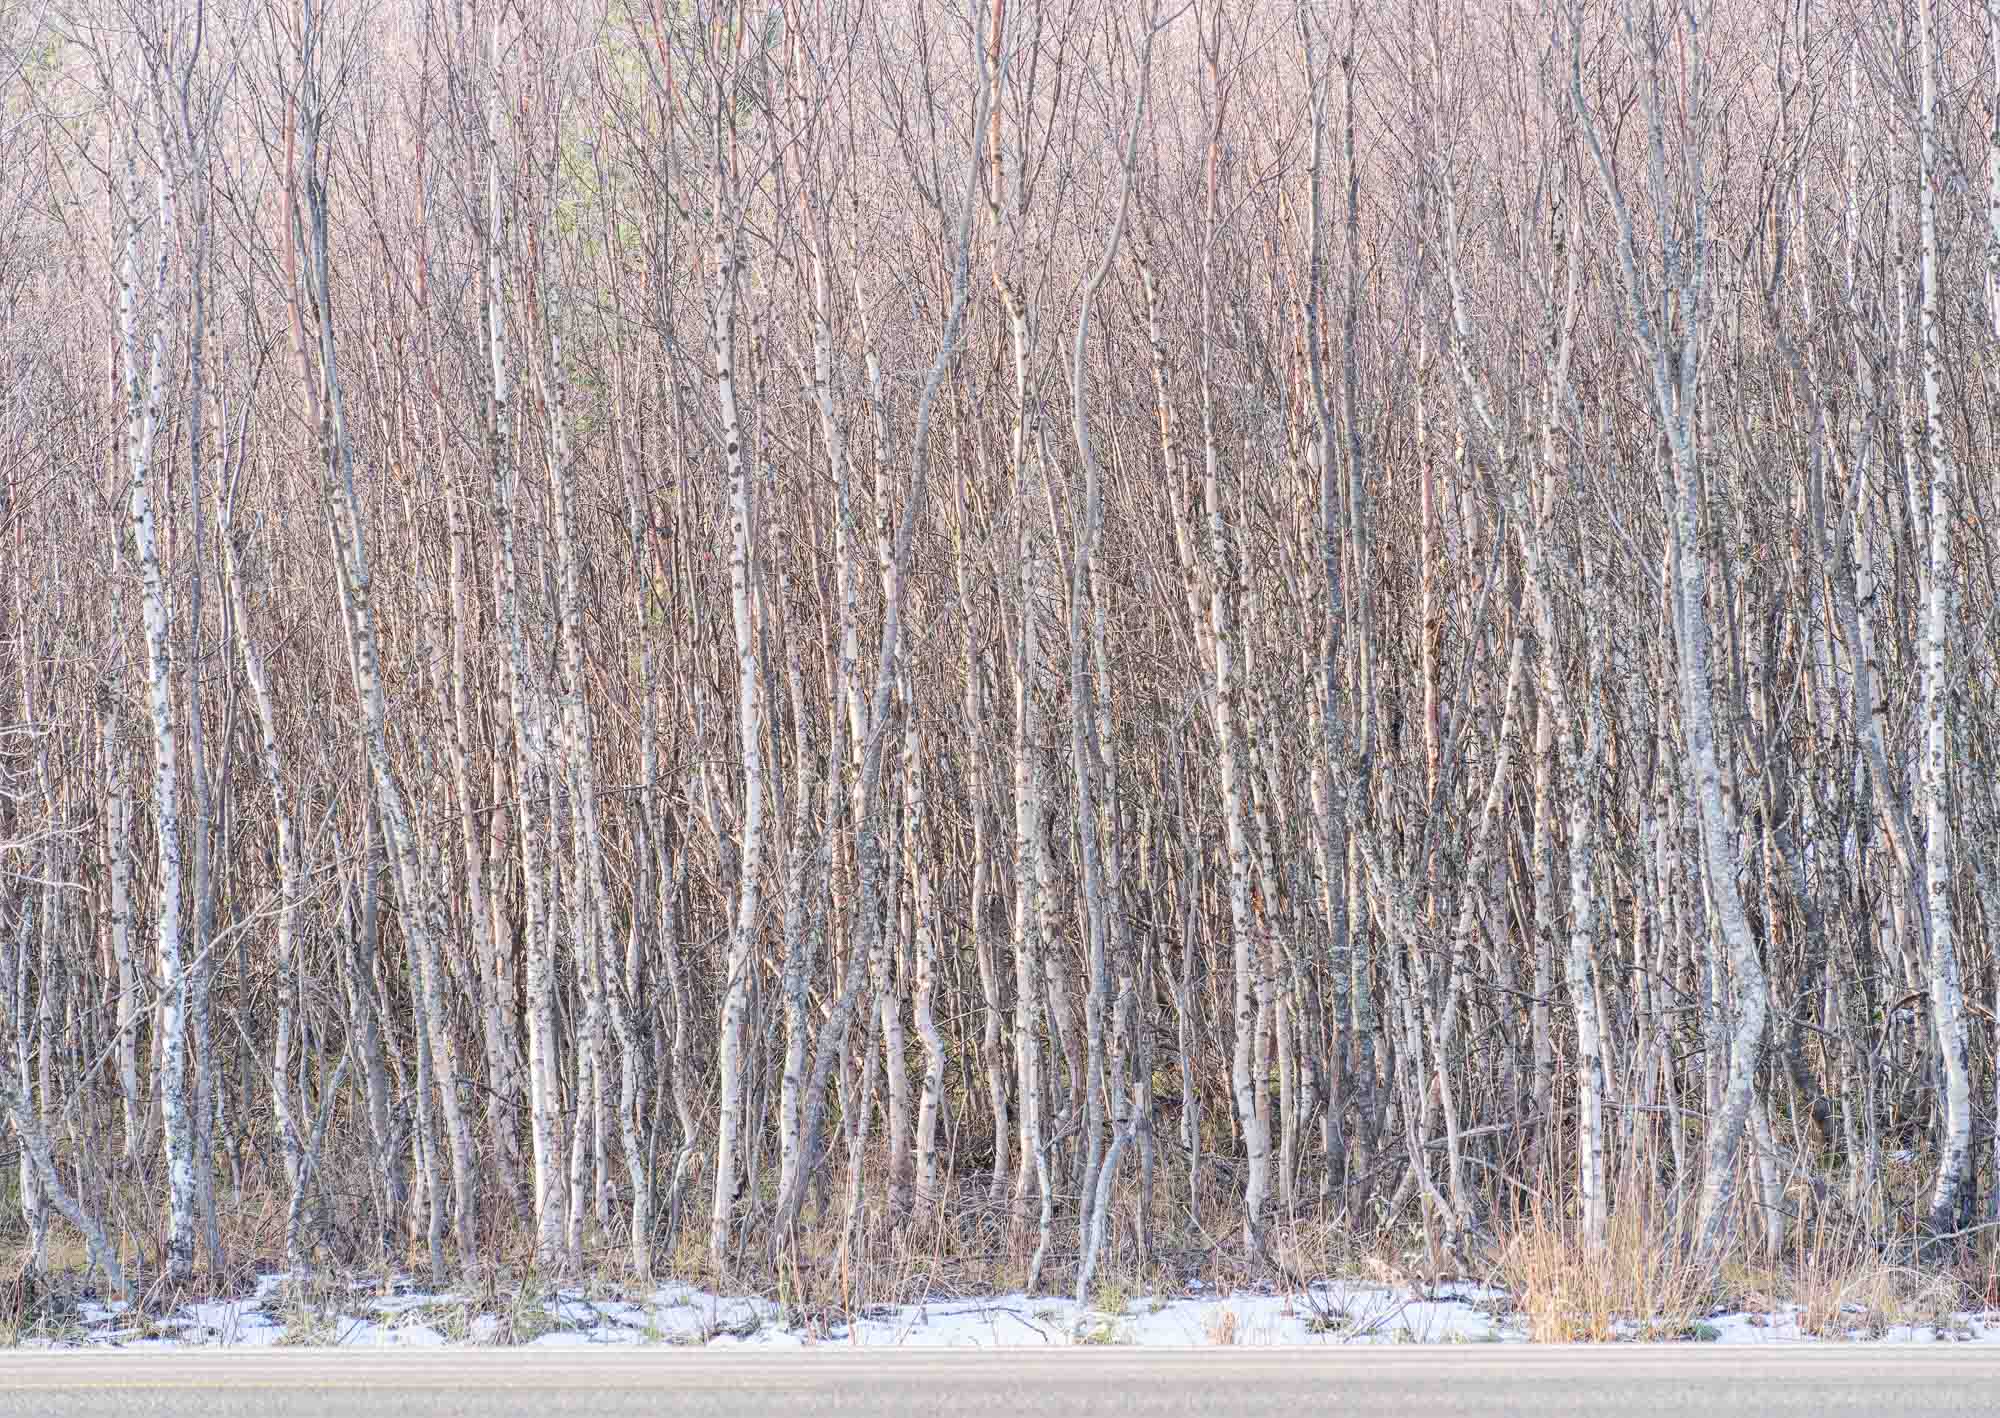 A dense birch forest in Tromsø, Norway, with slender white trunks and minimal snow on the ground, exemplifying winter's quietude.